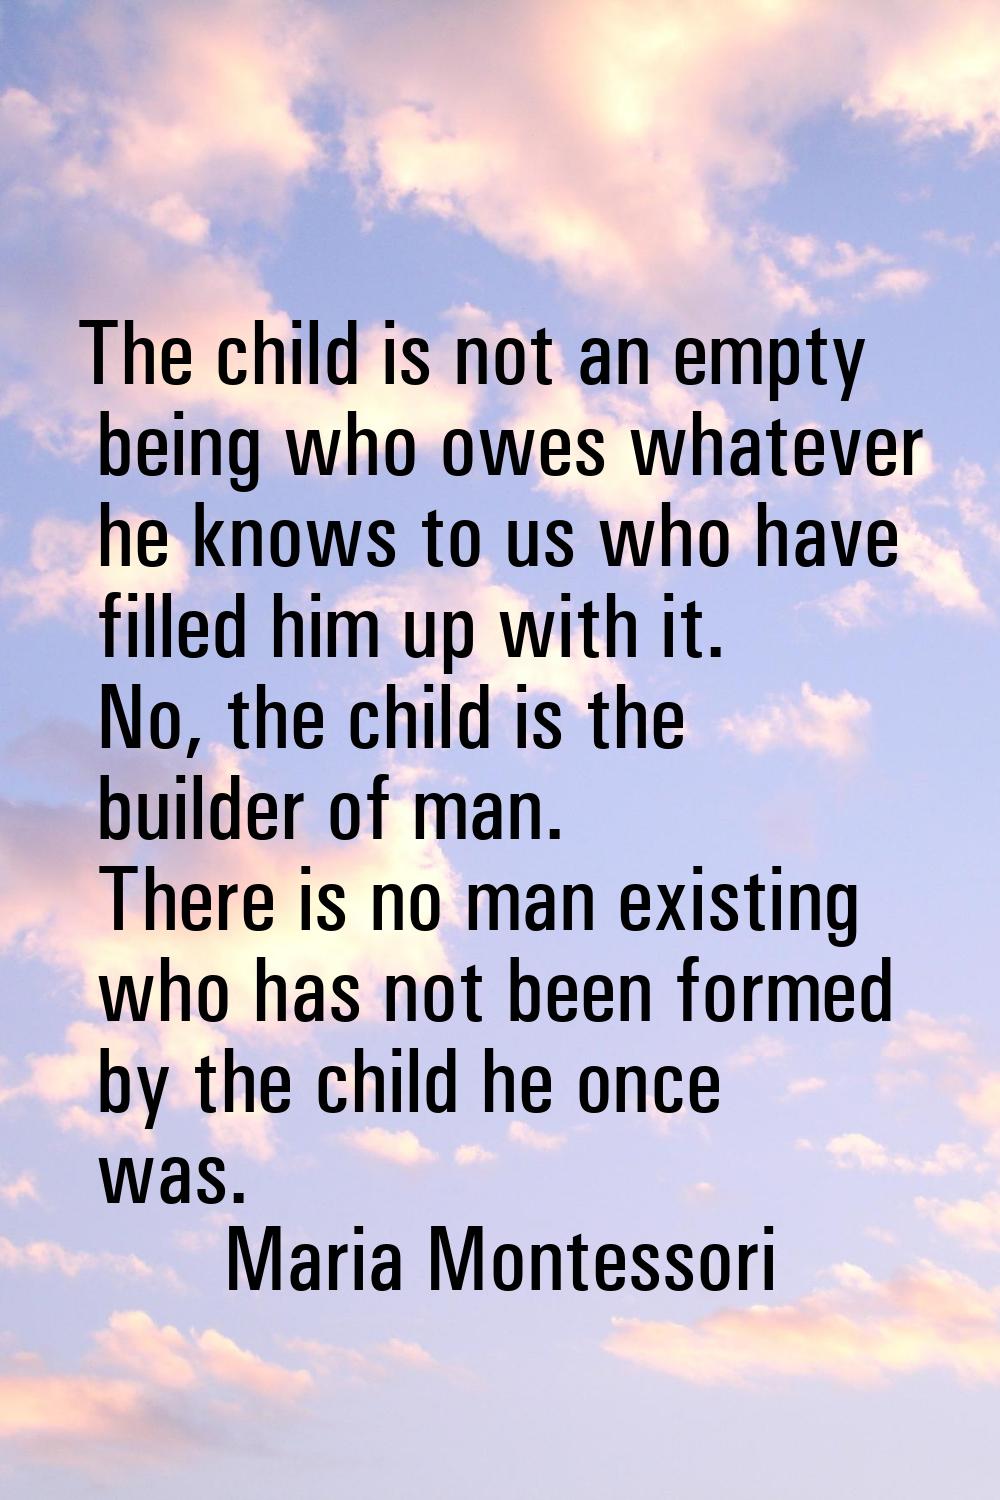 The child is not an empty being who owes whatever he knows to us who have filled him up with it. No